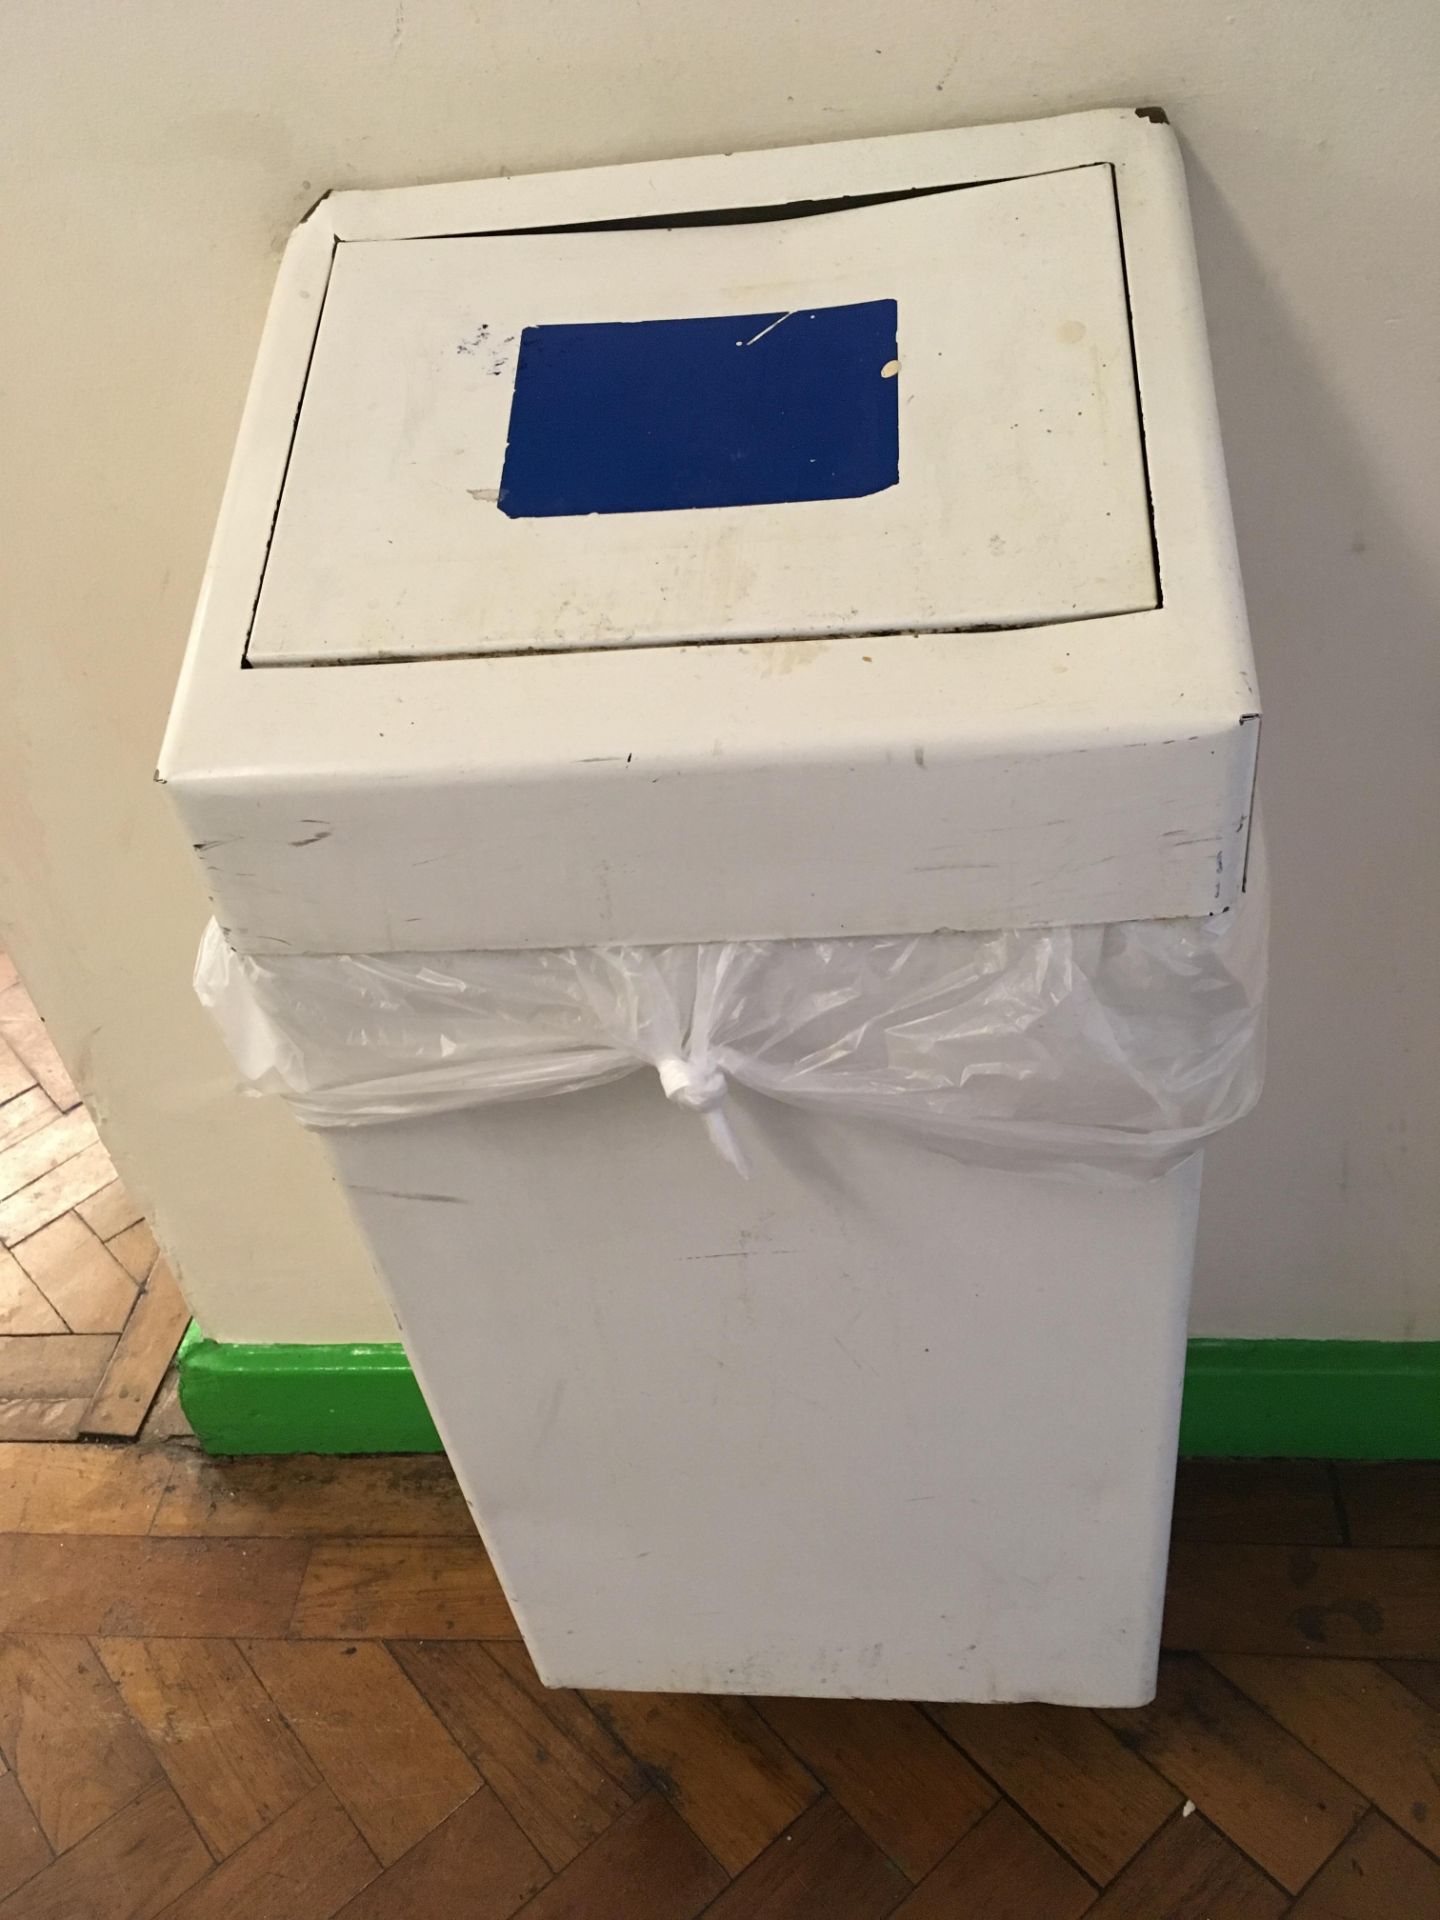 Waste bins to second floor, 9 approx.